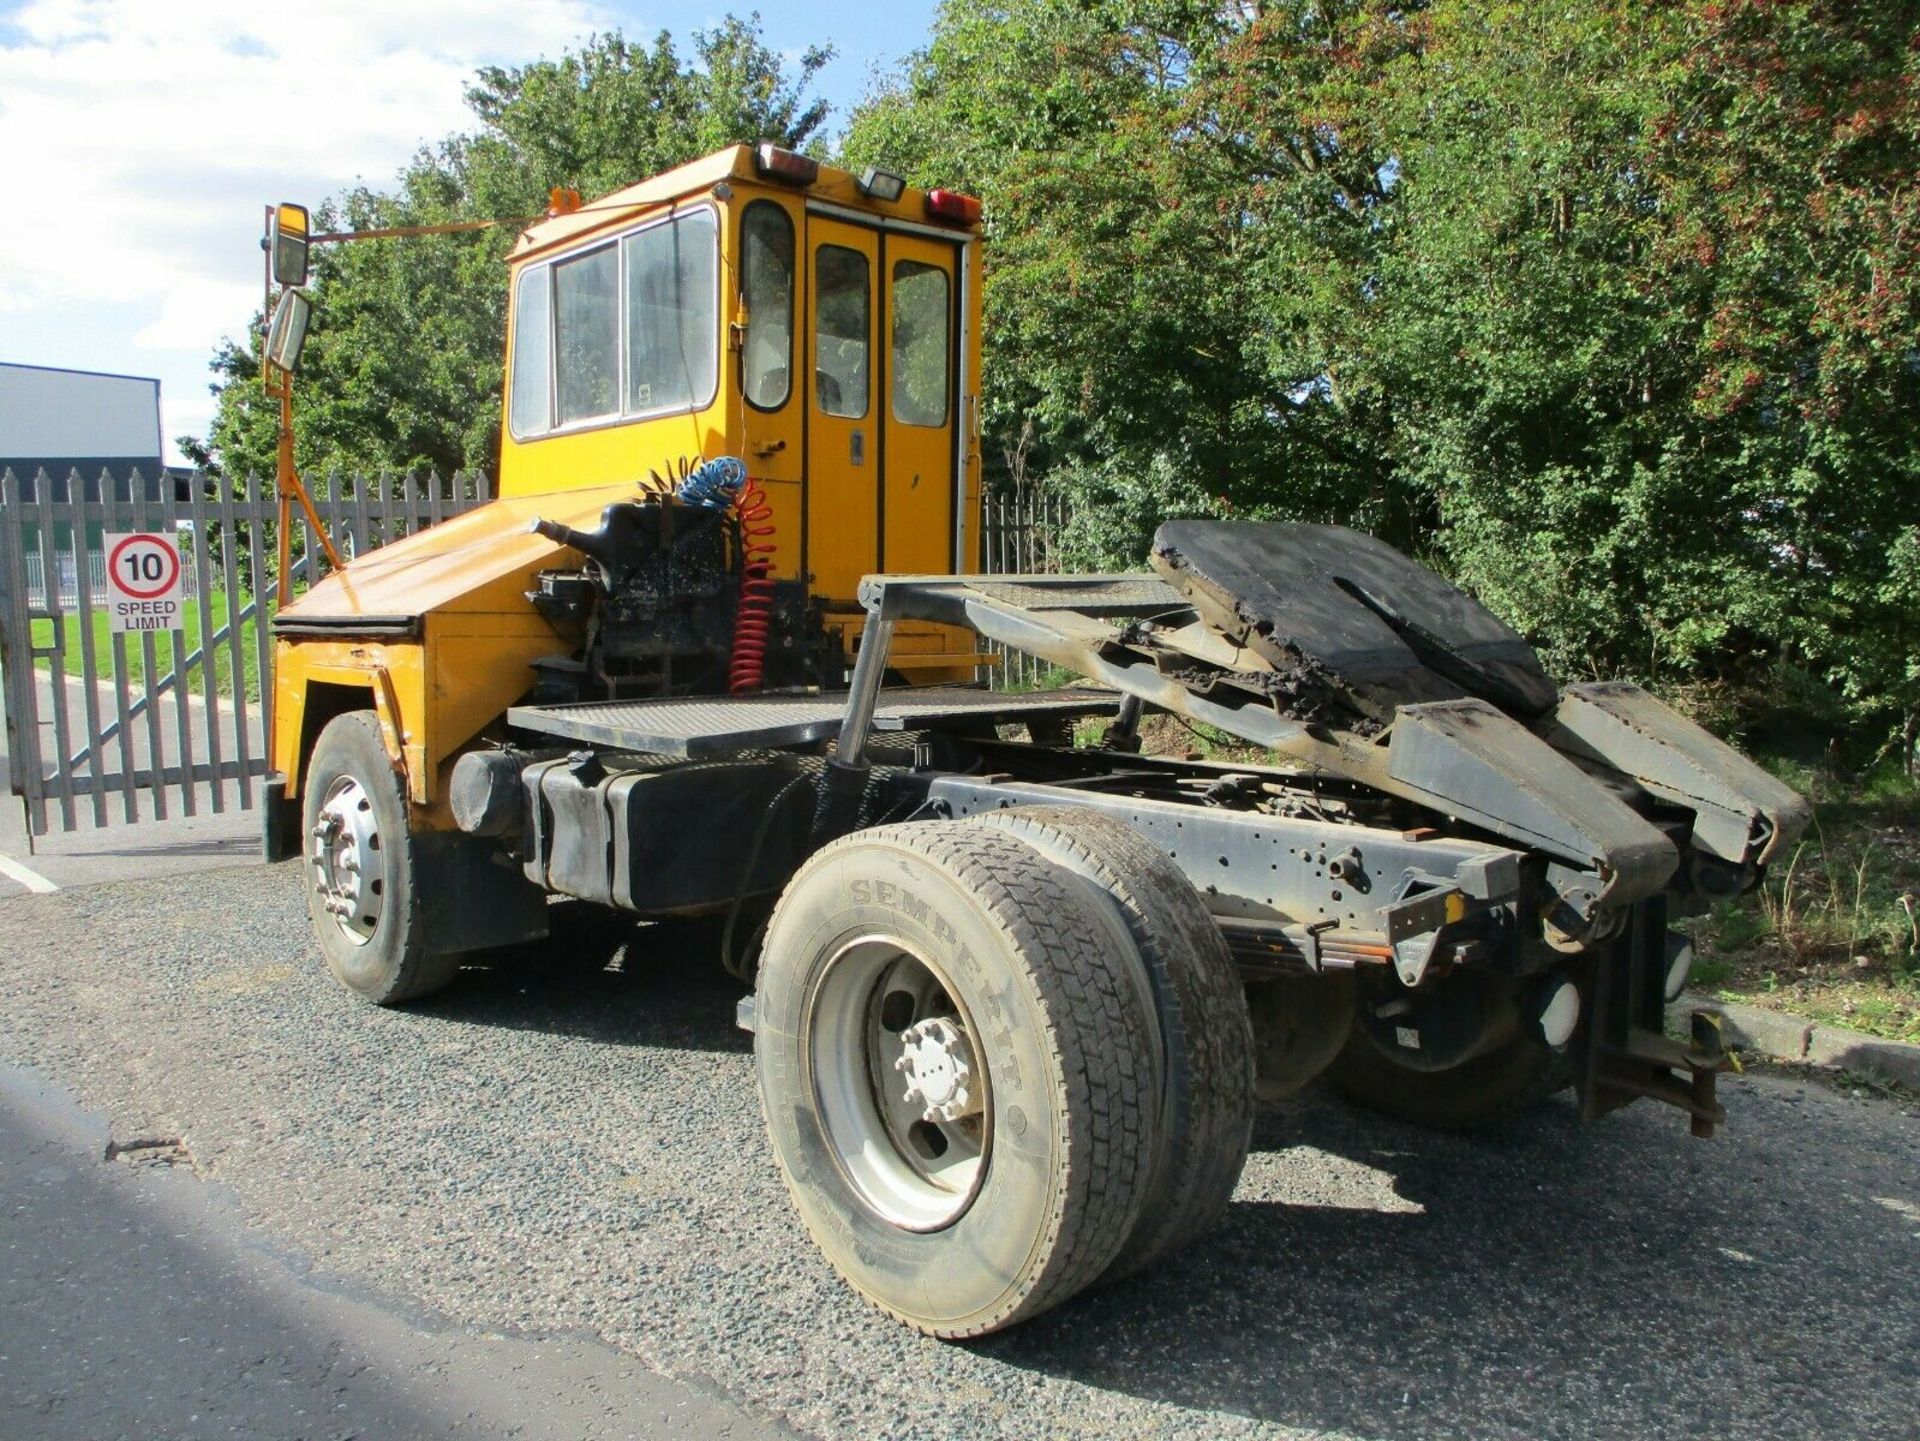 Reliance Dock spotter shunter tow tug tractor unit - Image 6 of 10